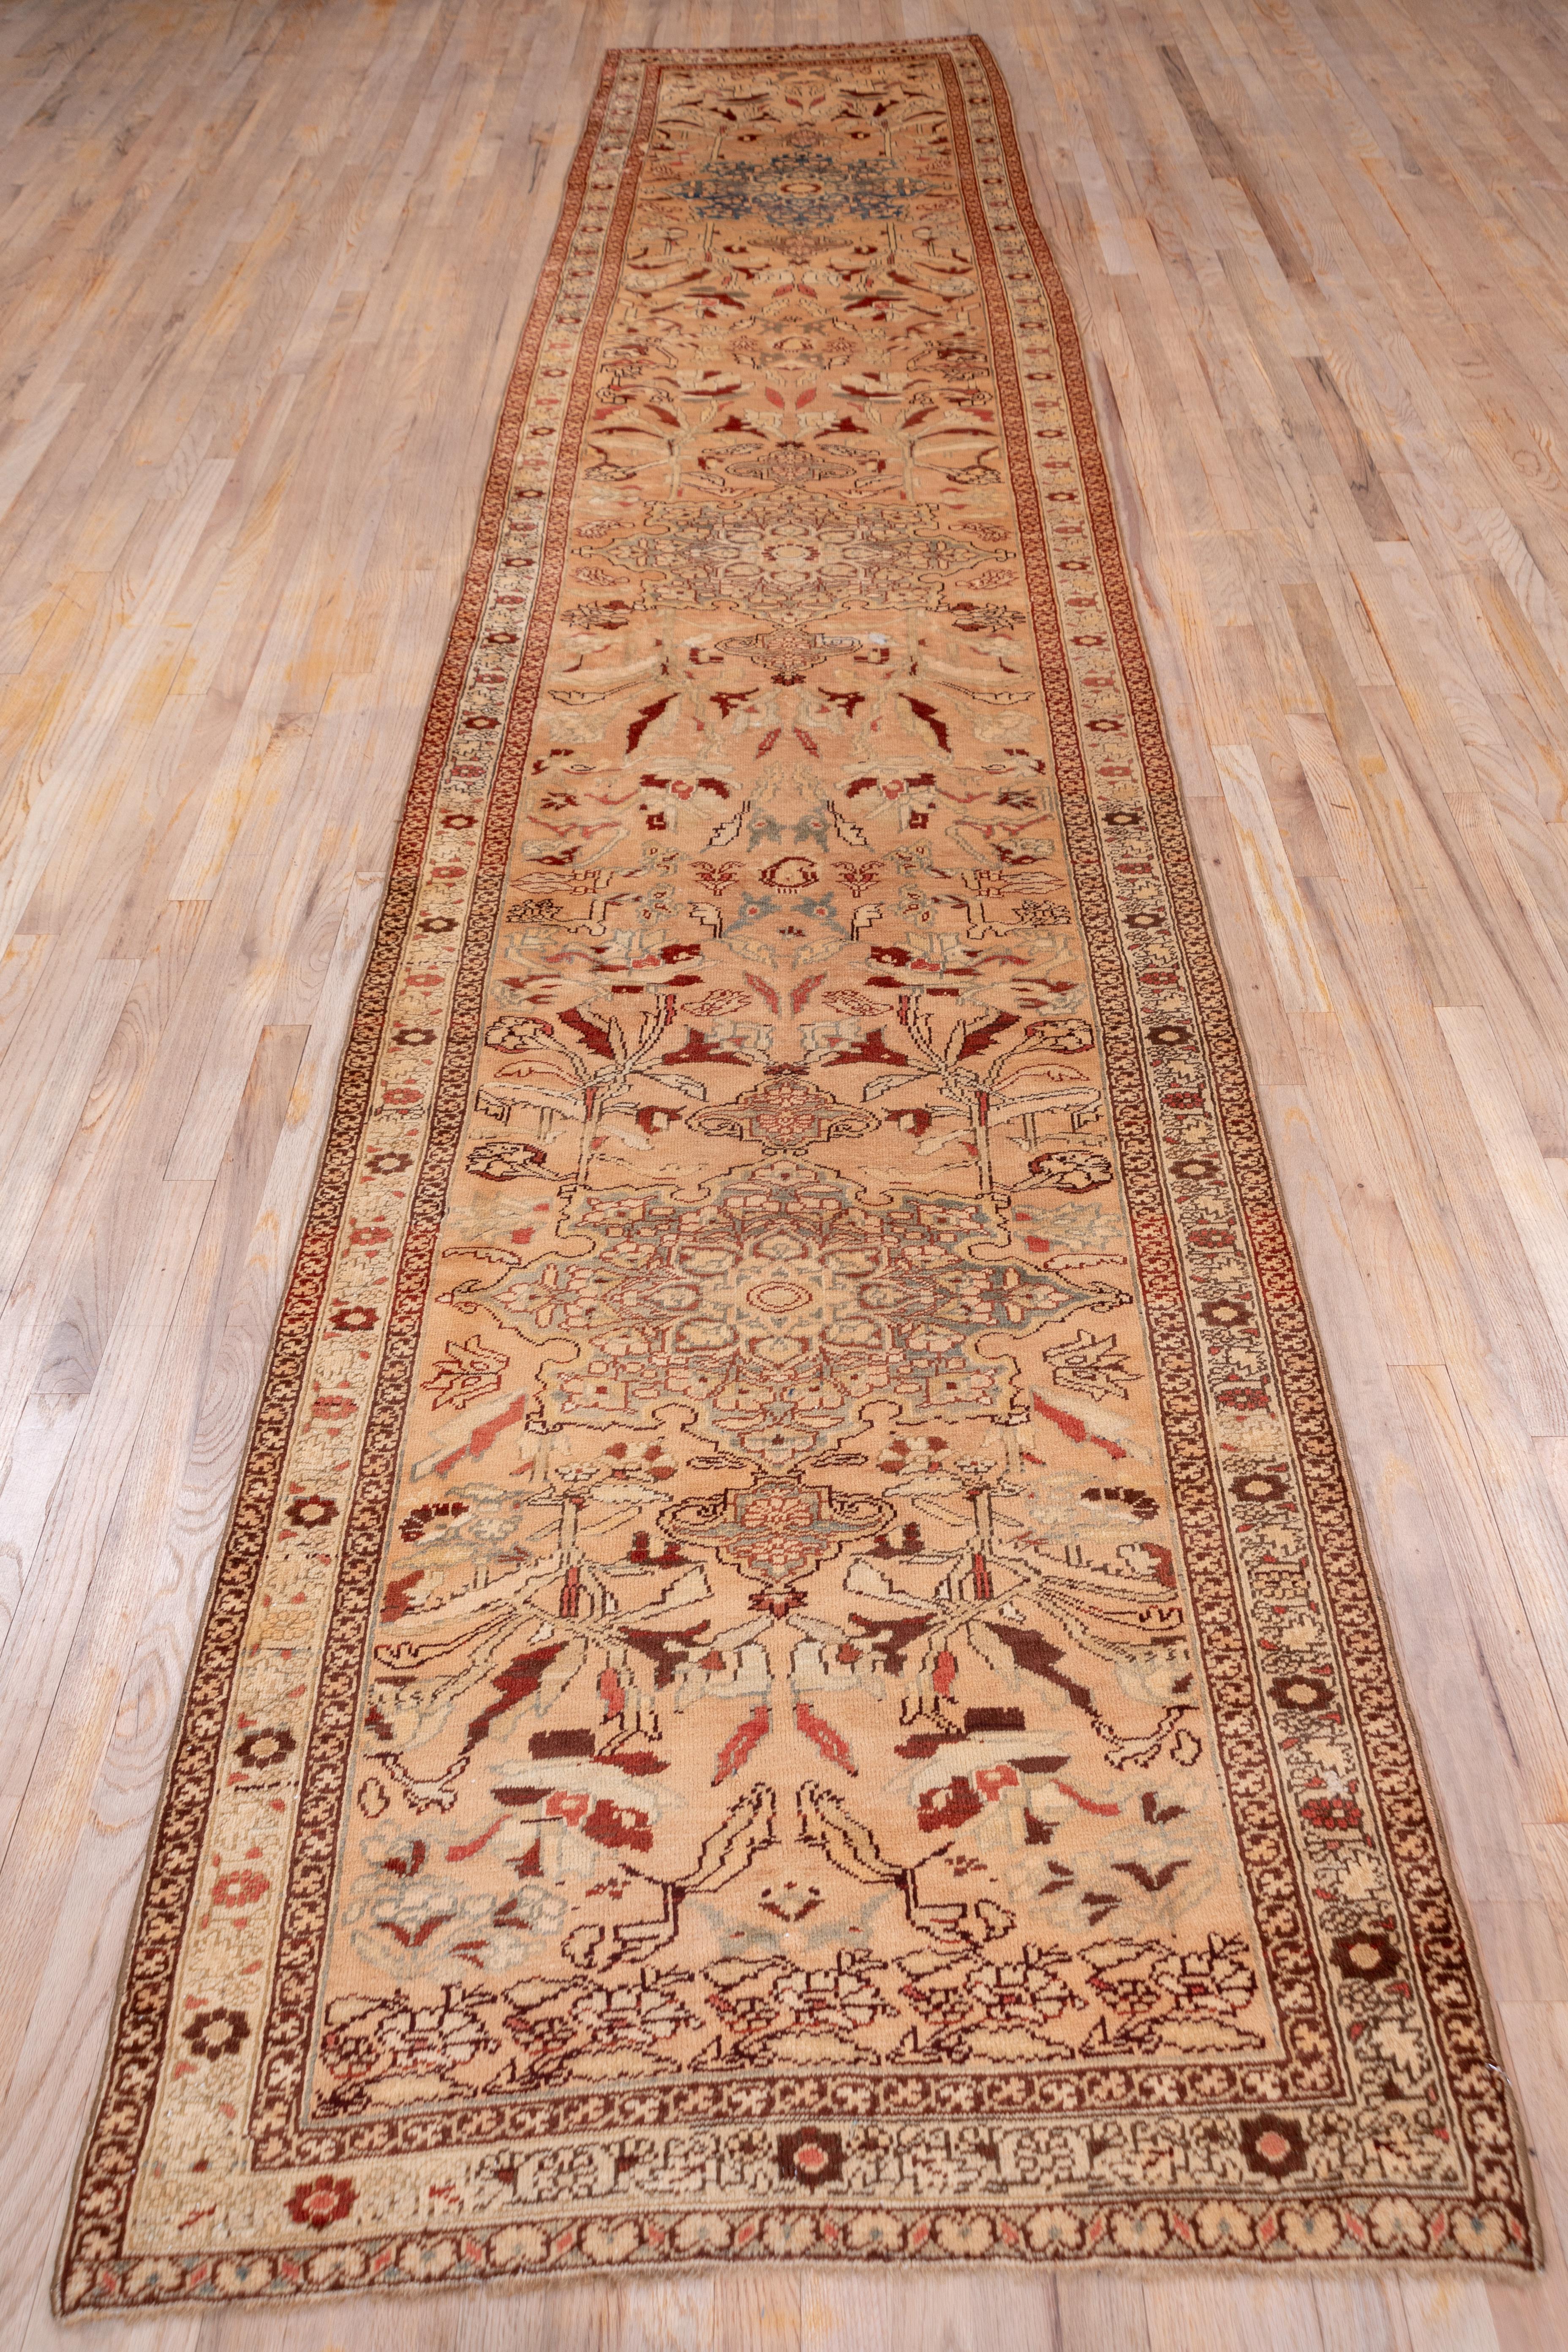 This runner is strictly in the Persian style with three pendanted octofoil medallions sprouting flowering plants. Botehs, carnations, and wavy leaves are detailed in red-brown, black and old ivory on the straw ground. The handle is pliable and the